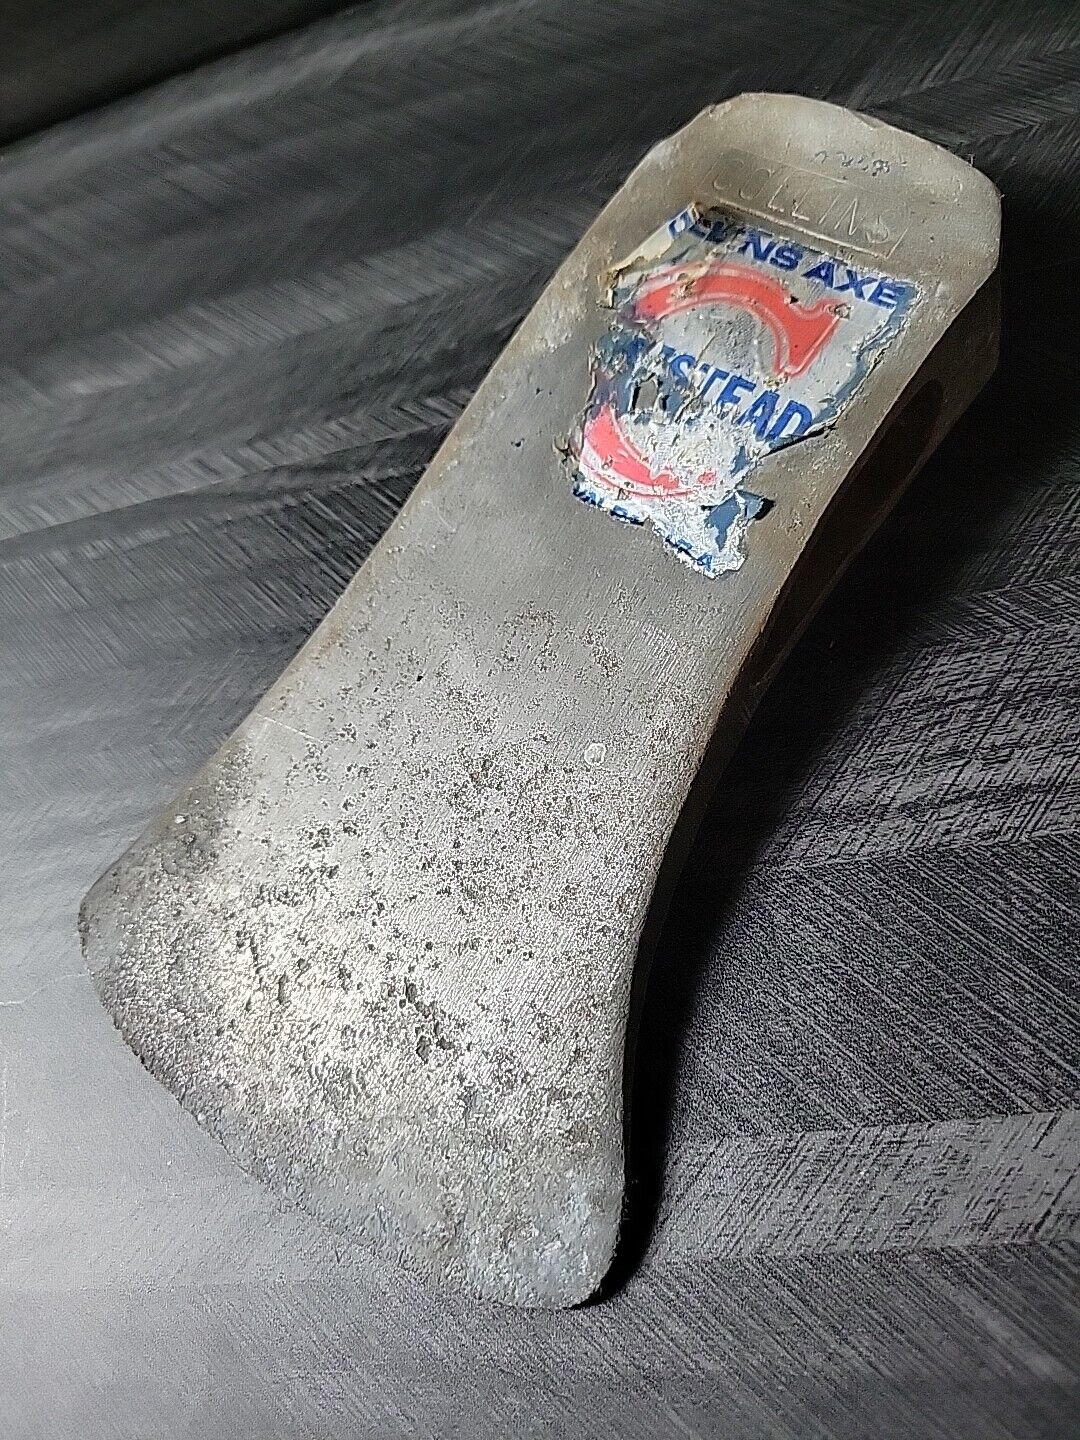 Vintage COLLINS Homestead Single Bit Axe Head, Weighs 3.5 pounds